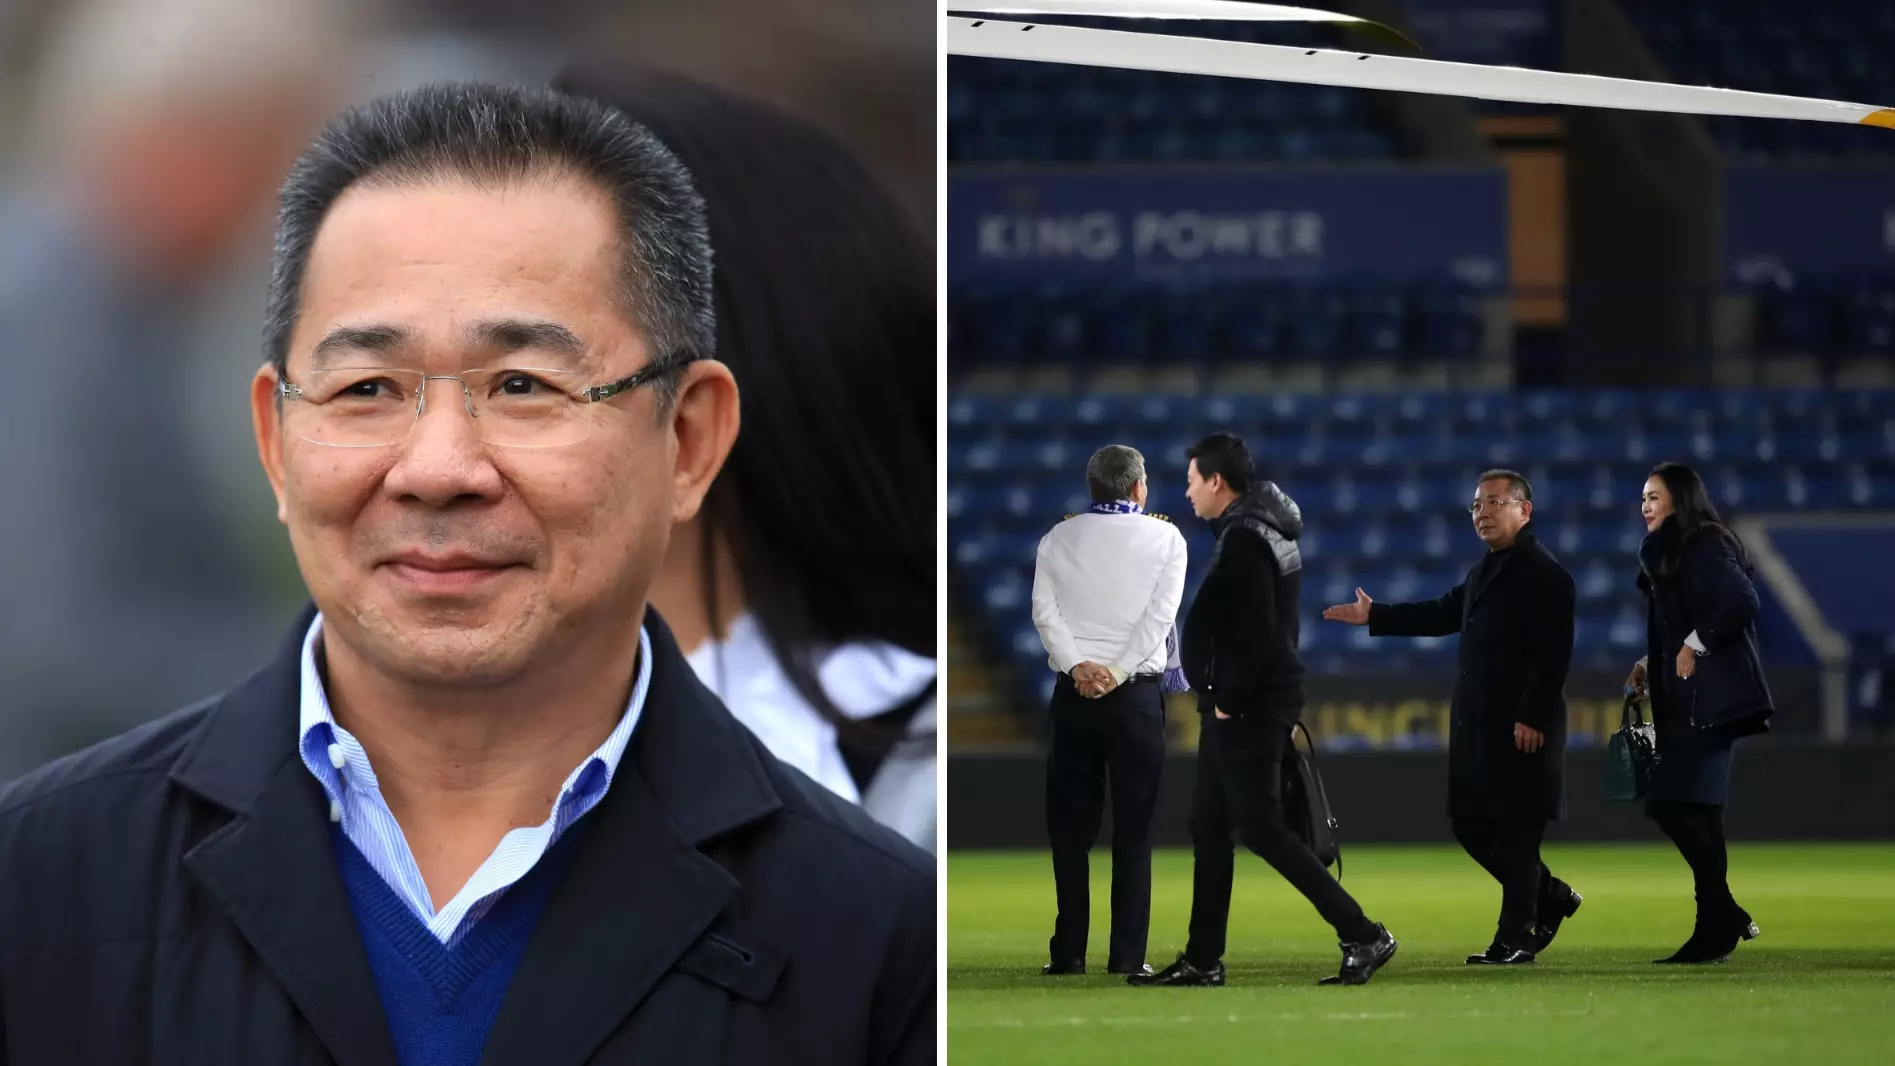 Leicester City Owner Vichai Srivaddhanaprabha Reportedly On Board Crashed Helicopter